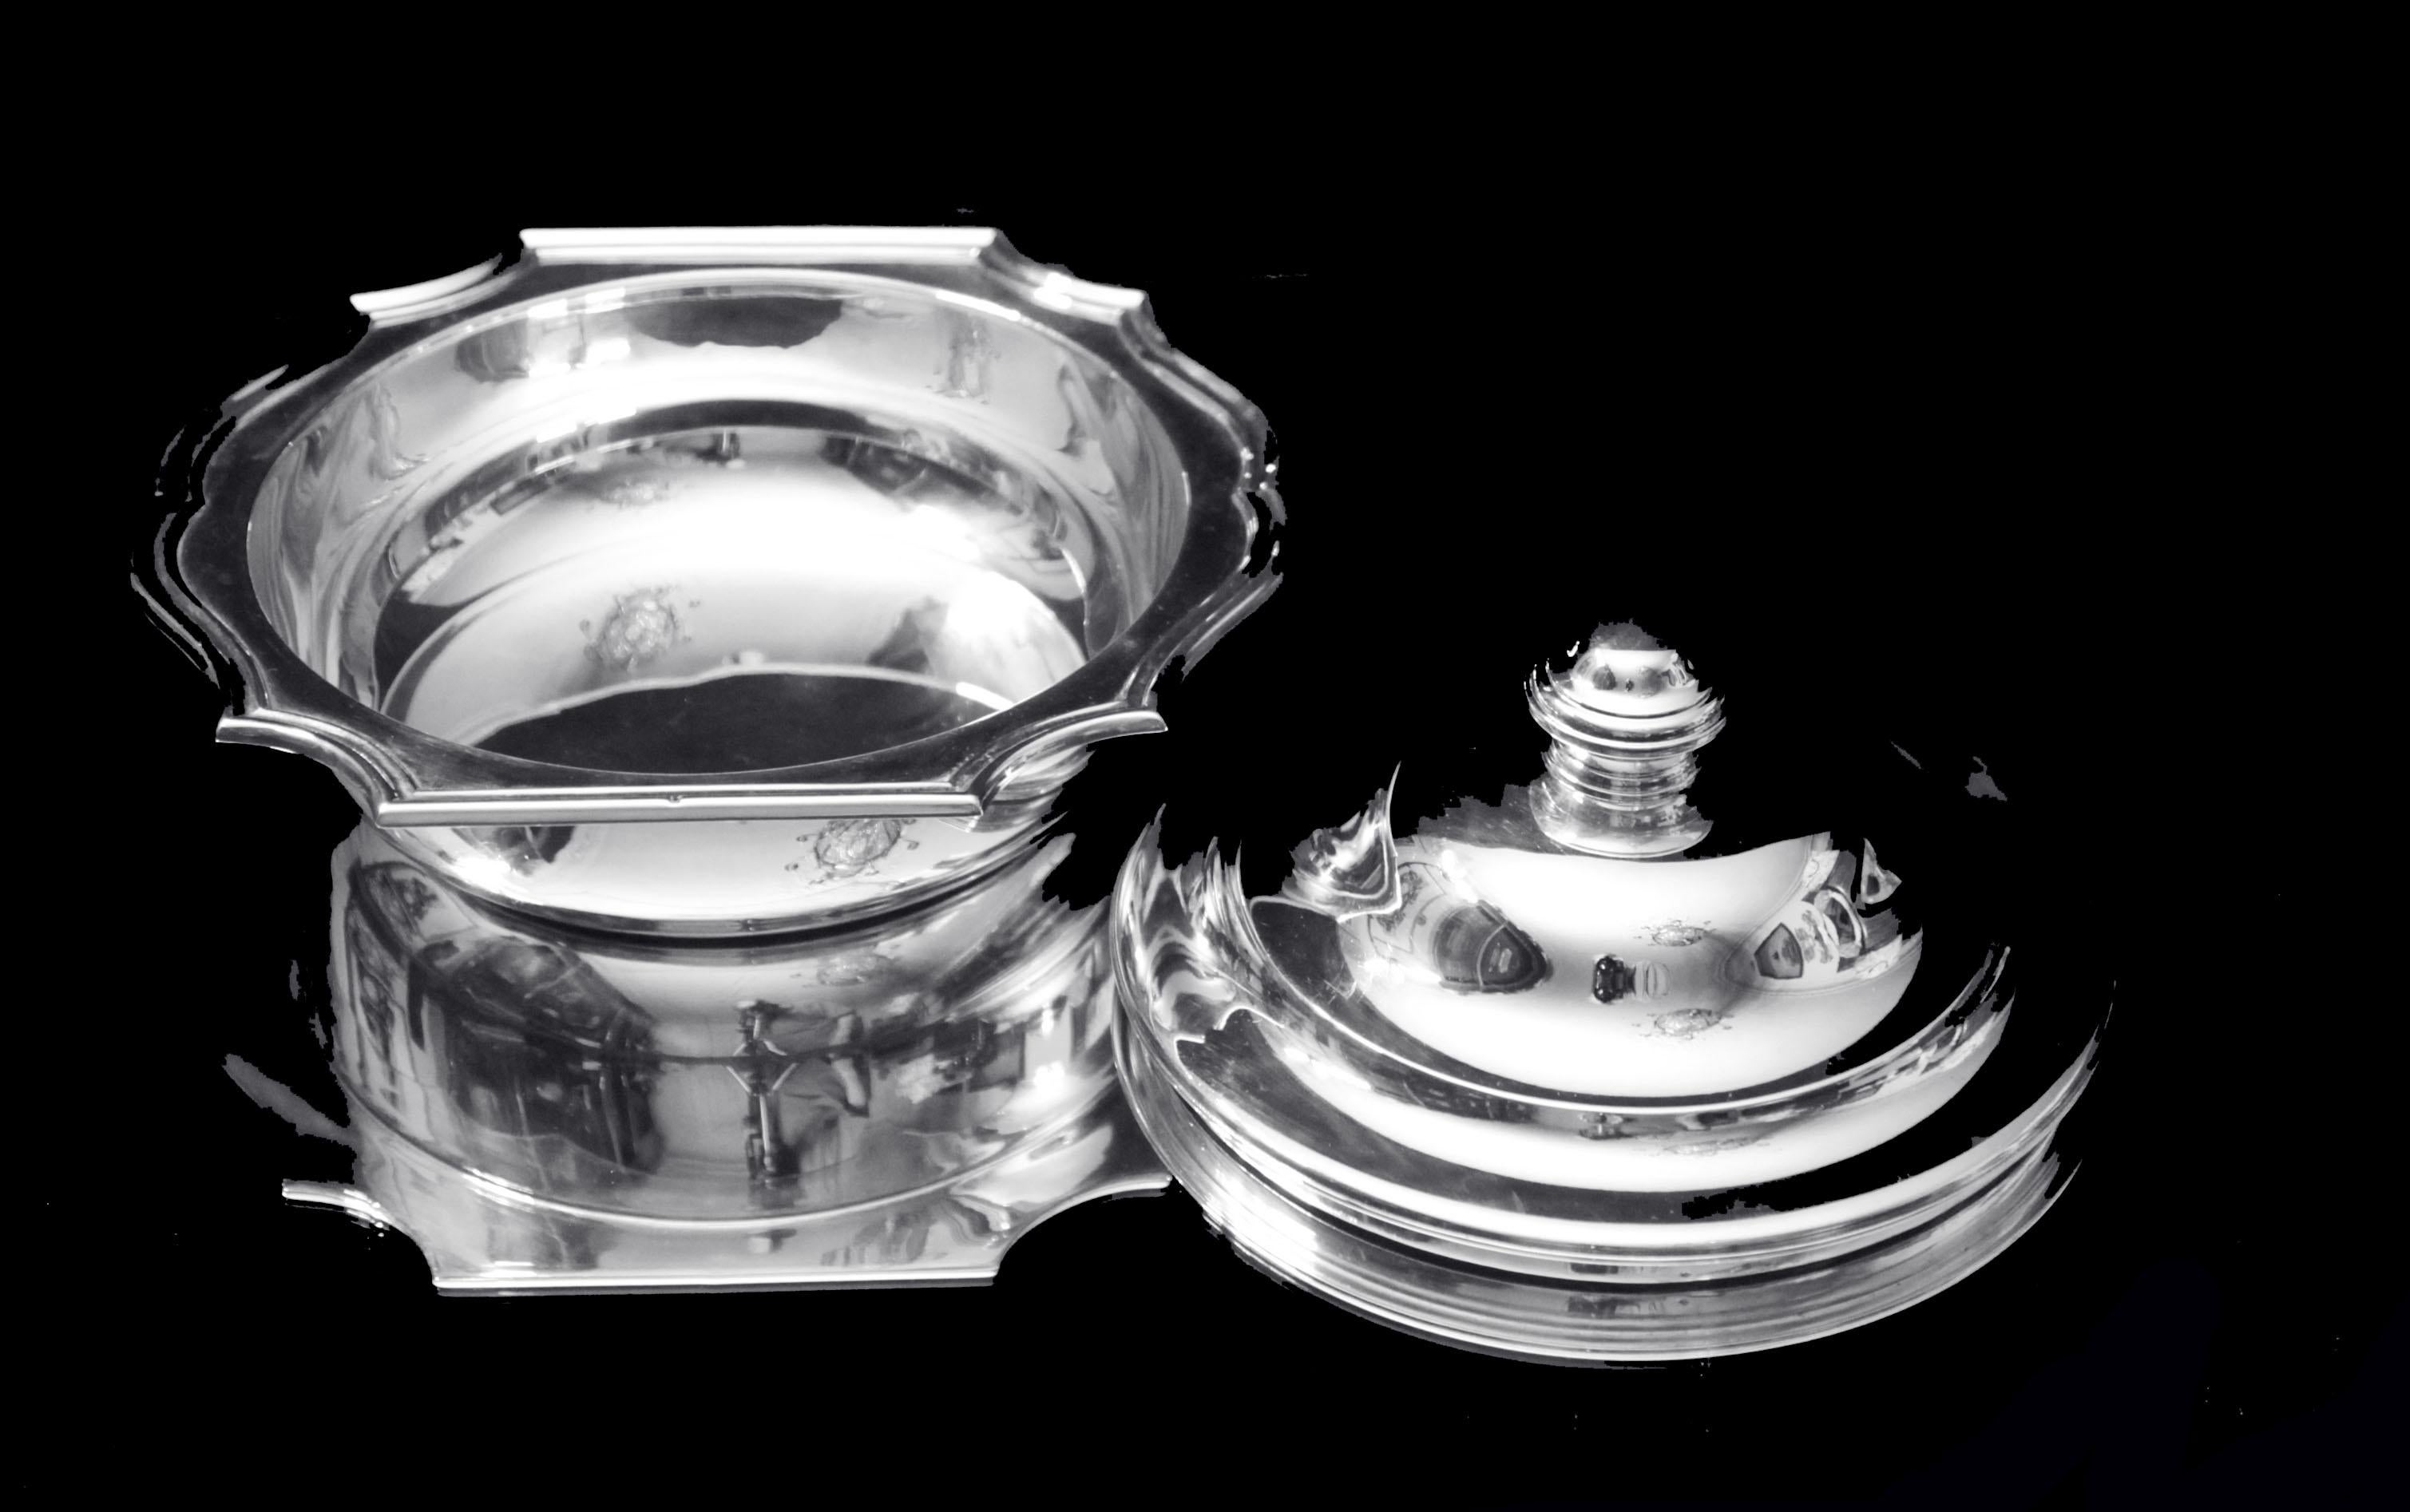 19th Century Cardeilhac (Christofle), Tetard - 8pc. Antique French 950 Sterling Silver Louis 